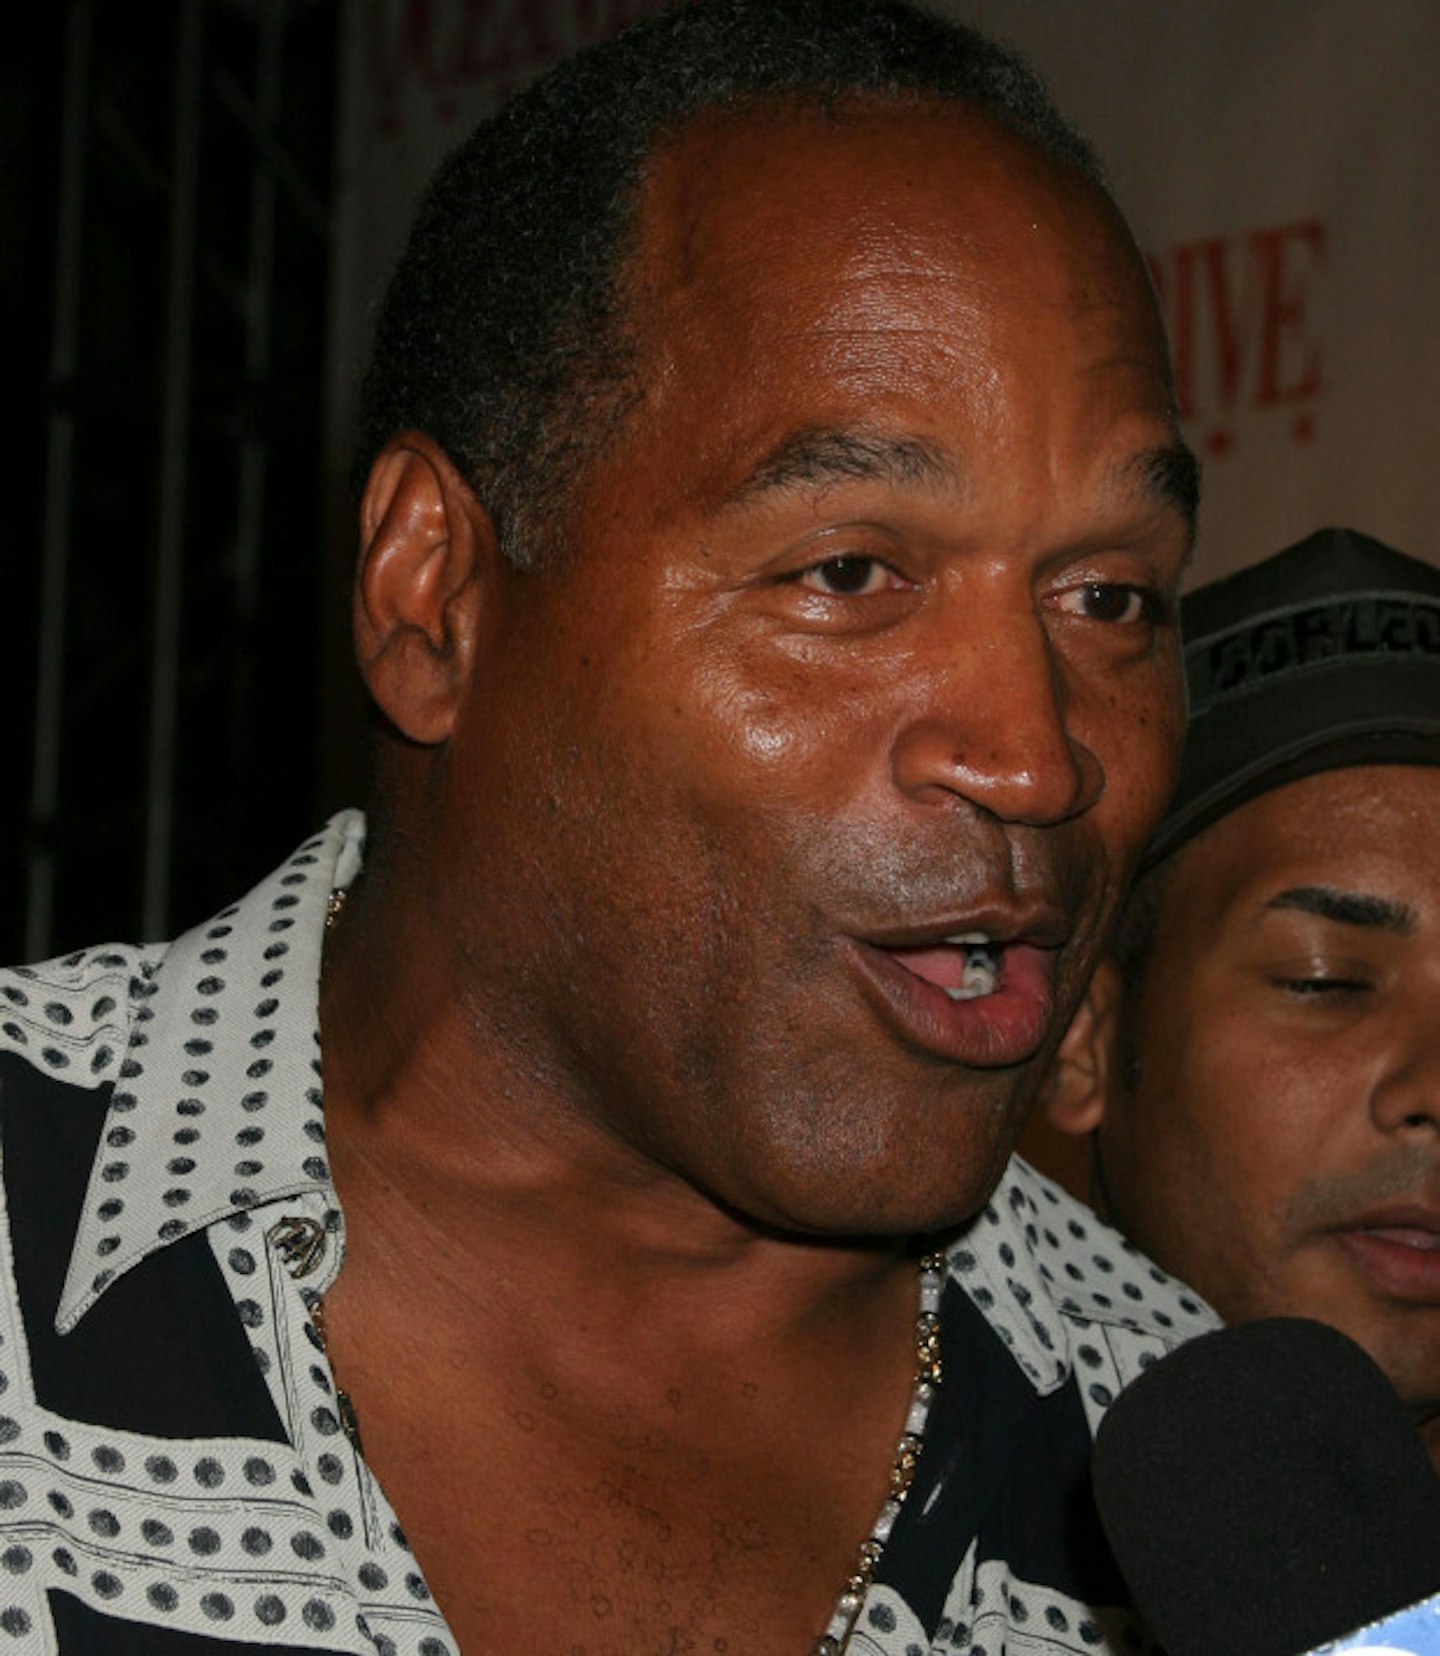 OJ is currently in prison, but was acquitted in the famous murder trial